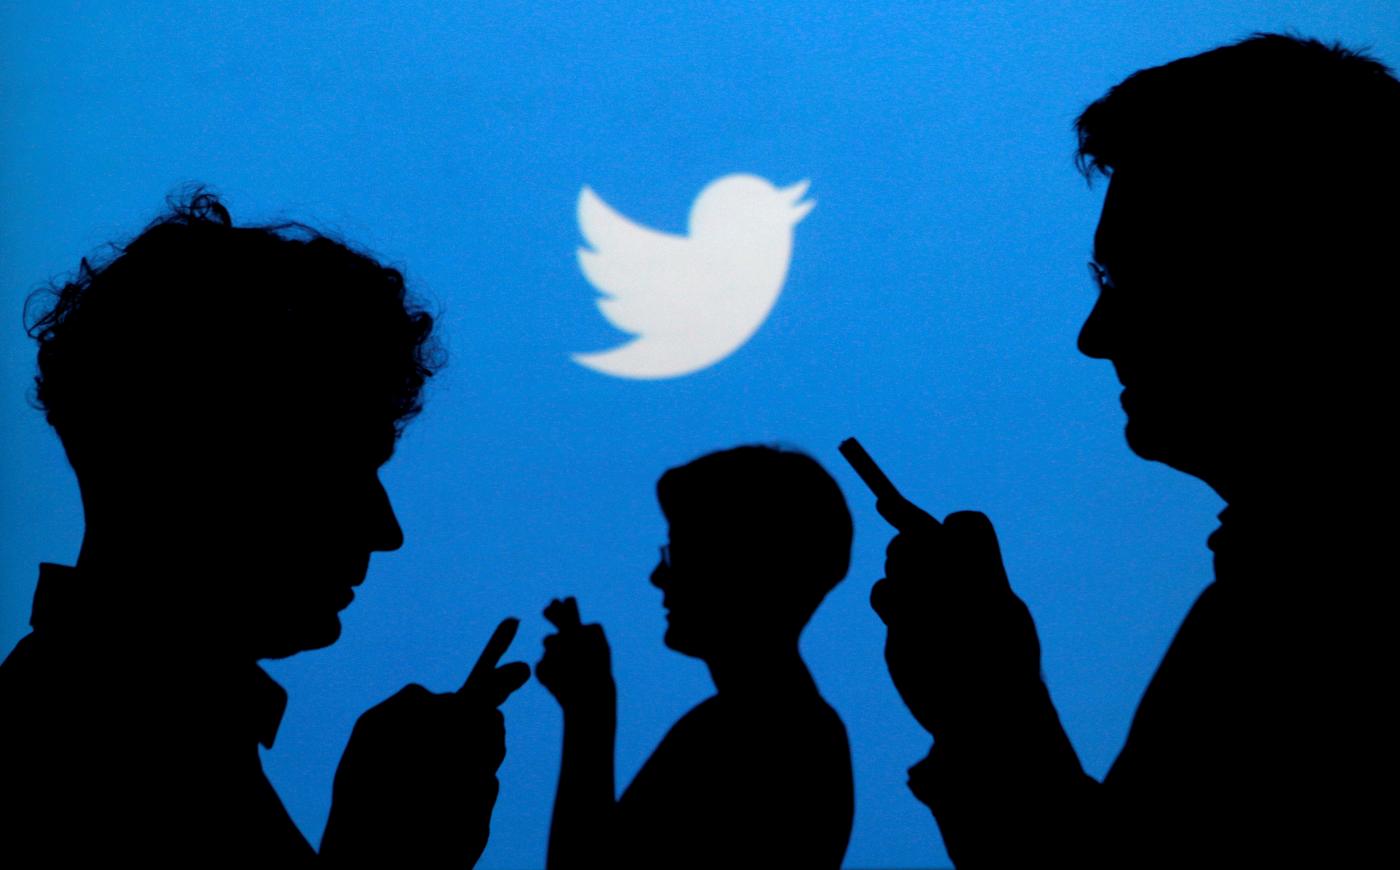 People are silhouetted against a backdrop projected with the Twitter logo (Reuters)